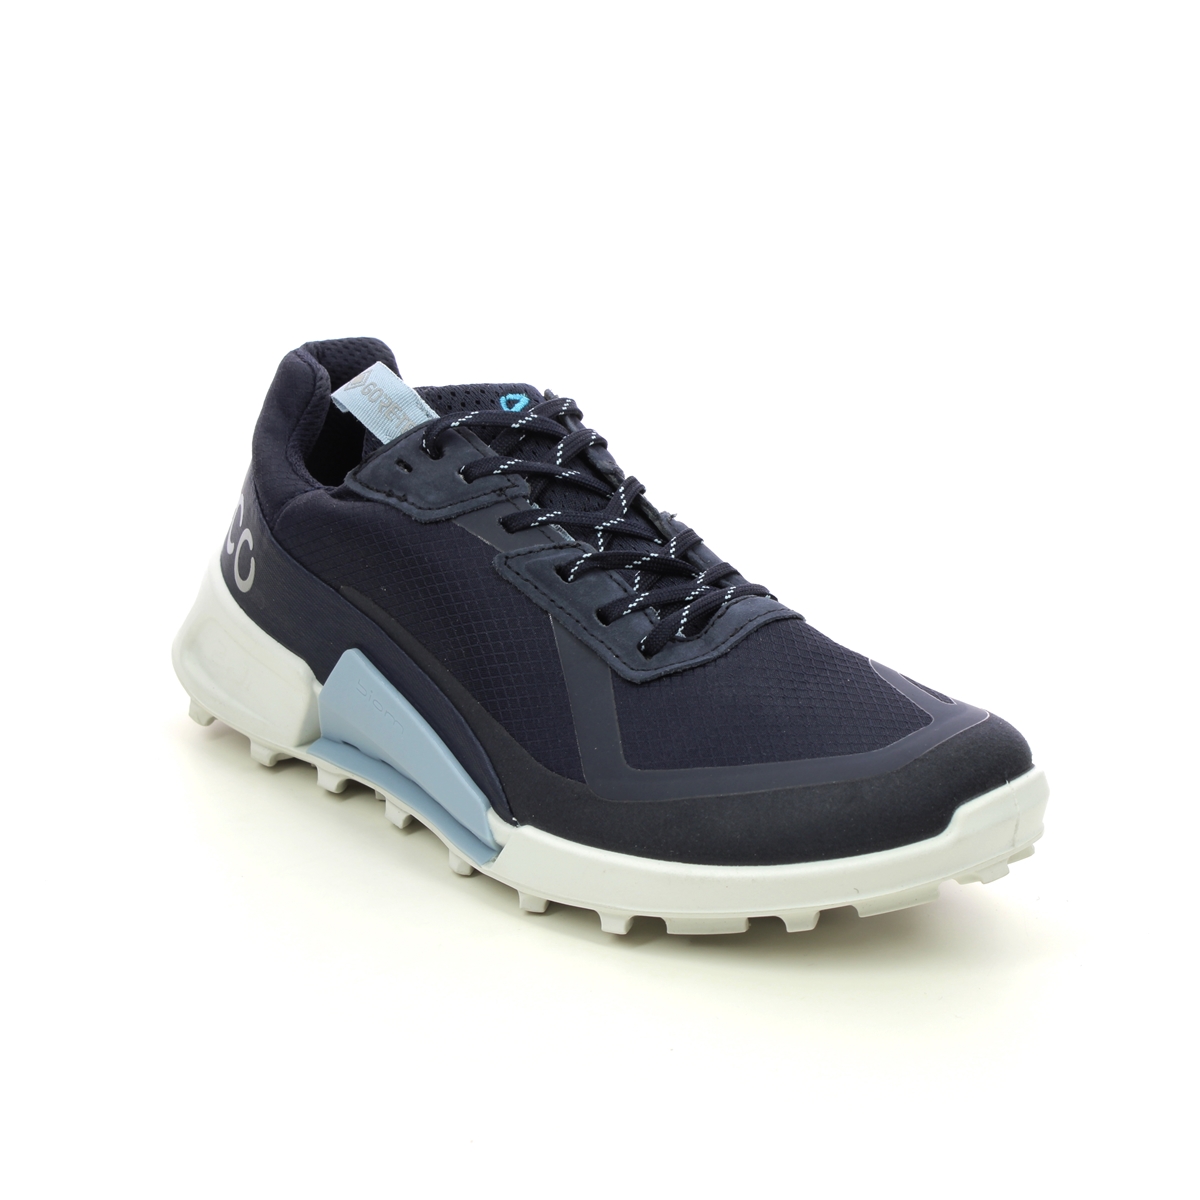 ECCO Biom 2.1 Womens Gtx Navy Womens Walking Shoes 822833-50769 in a Plain Textile in Size 42